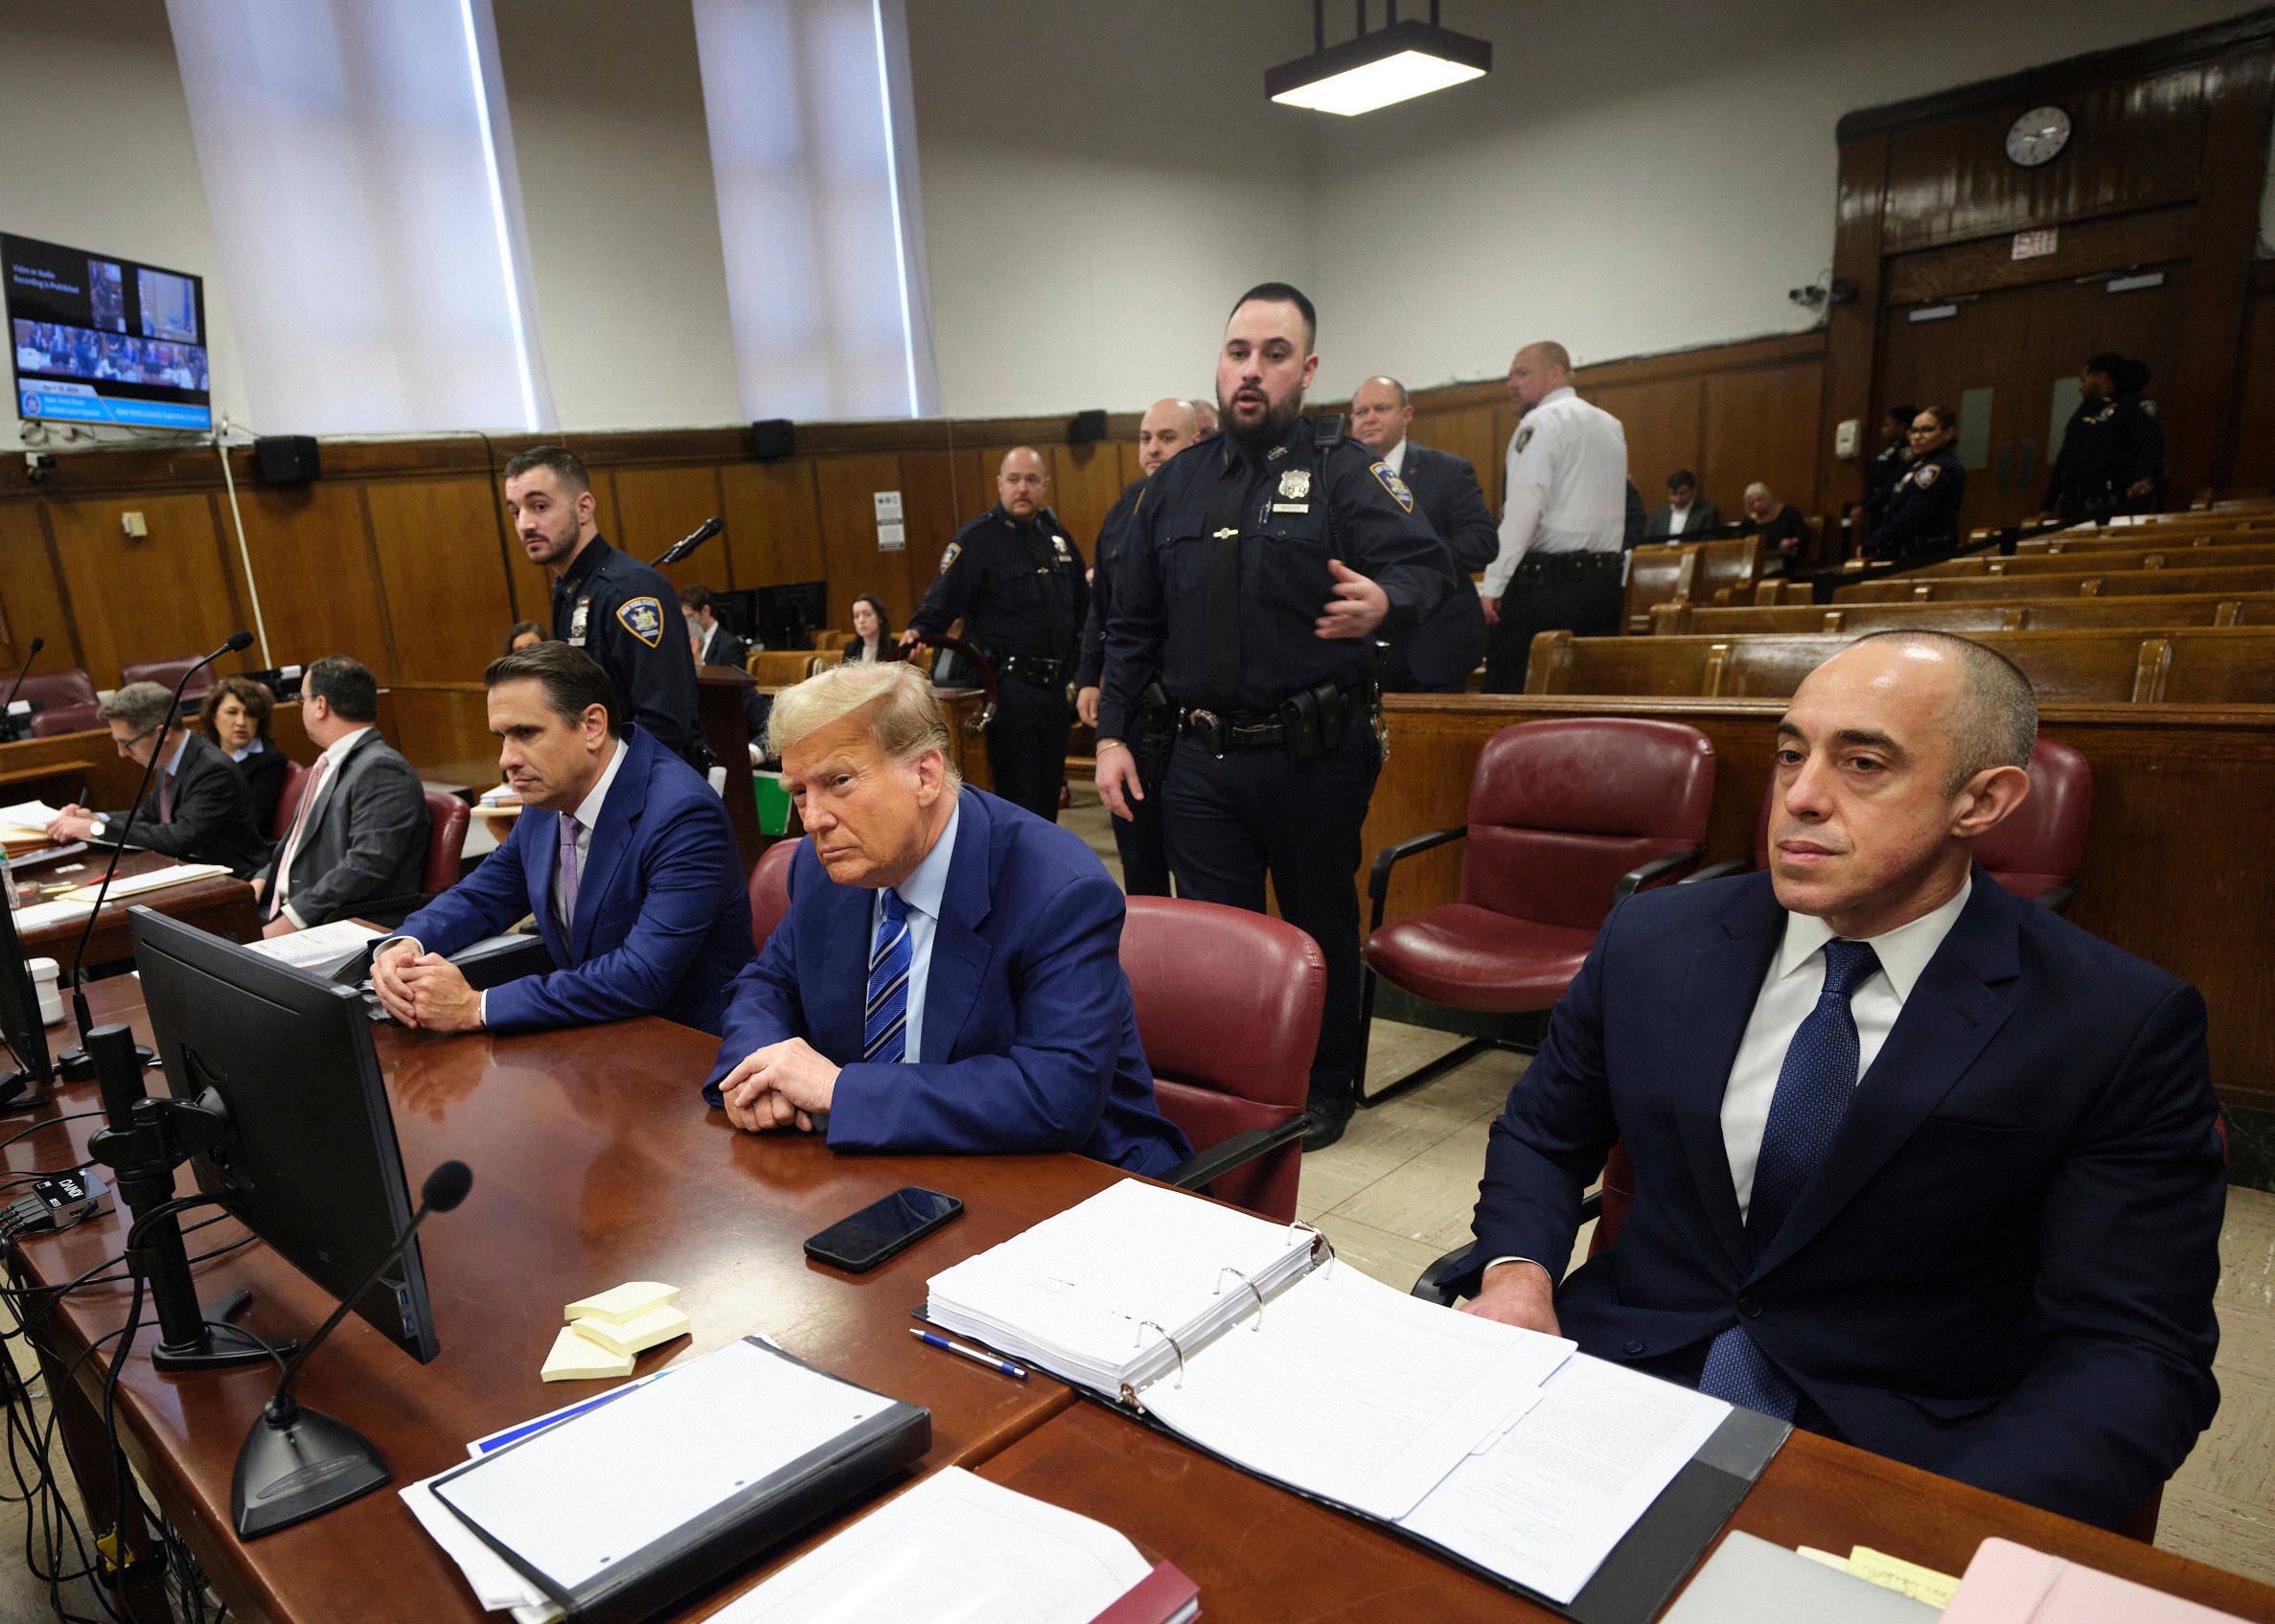 Donald Trump sits at the defense table in his hush money trial